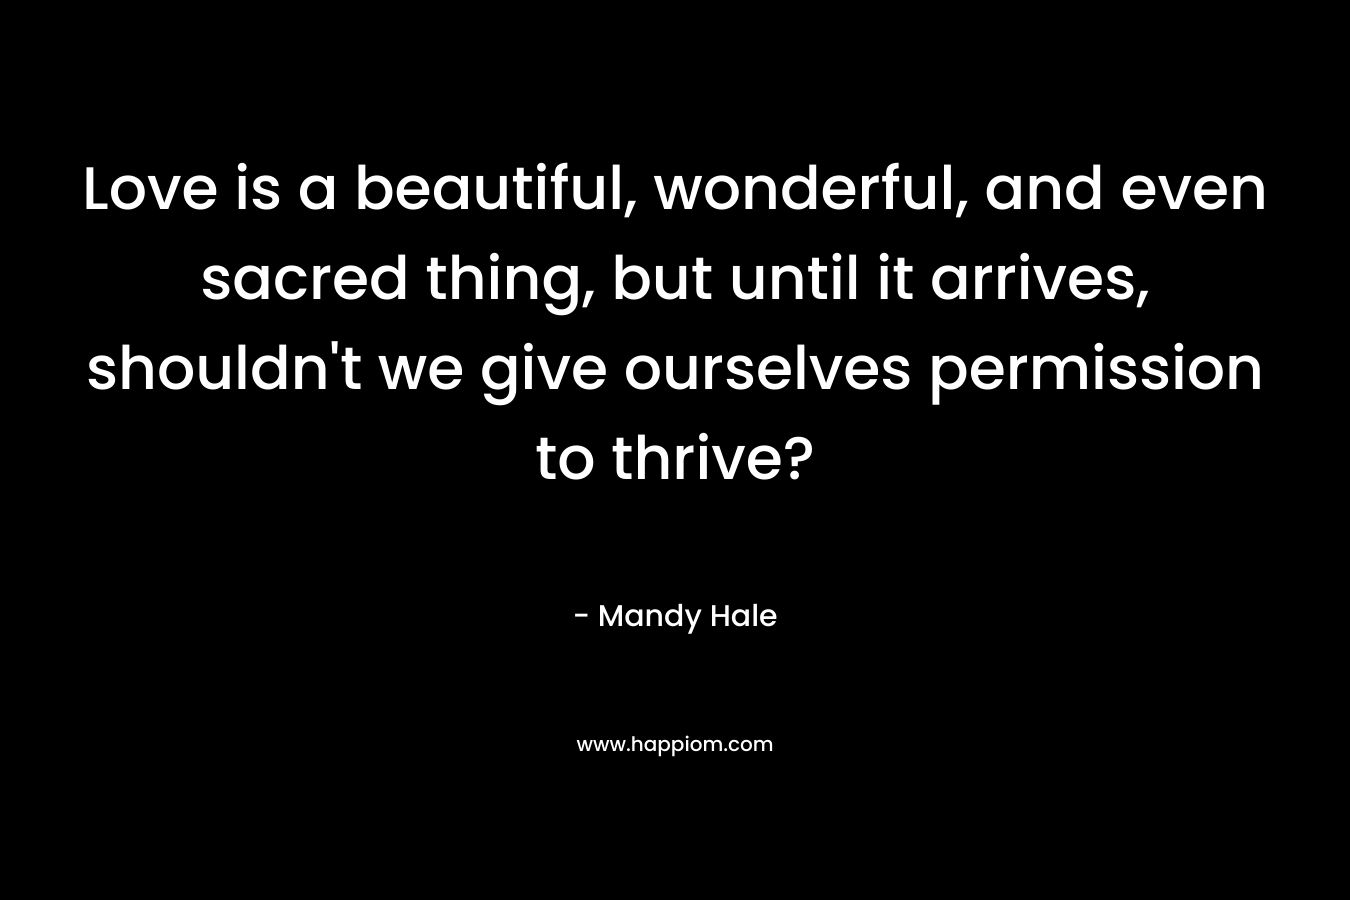 Love is a beautiful, wonderful, and even sacred thing, but until it arrives, shouldn’t we give ourselves permission to thrive? – Mandy Hale